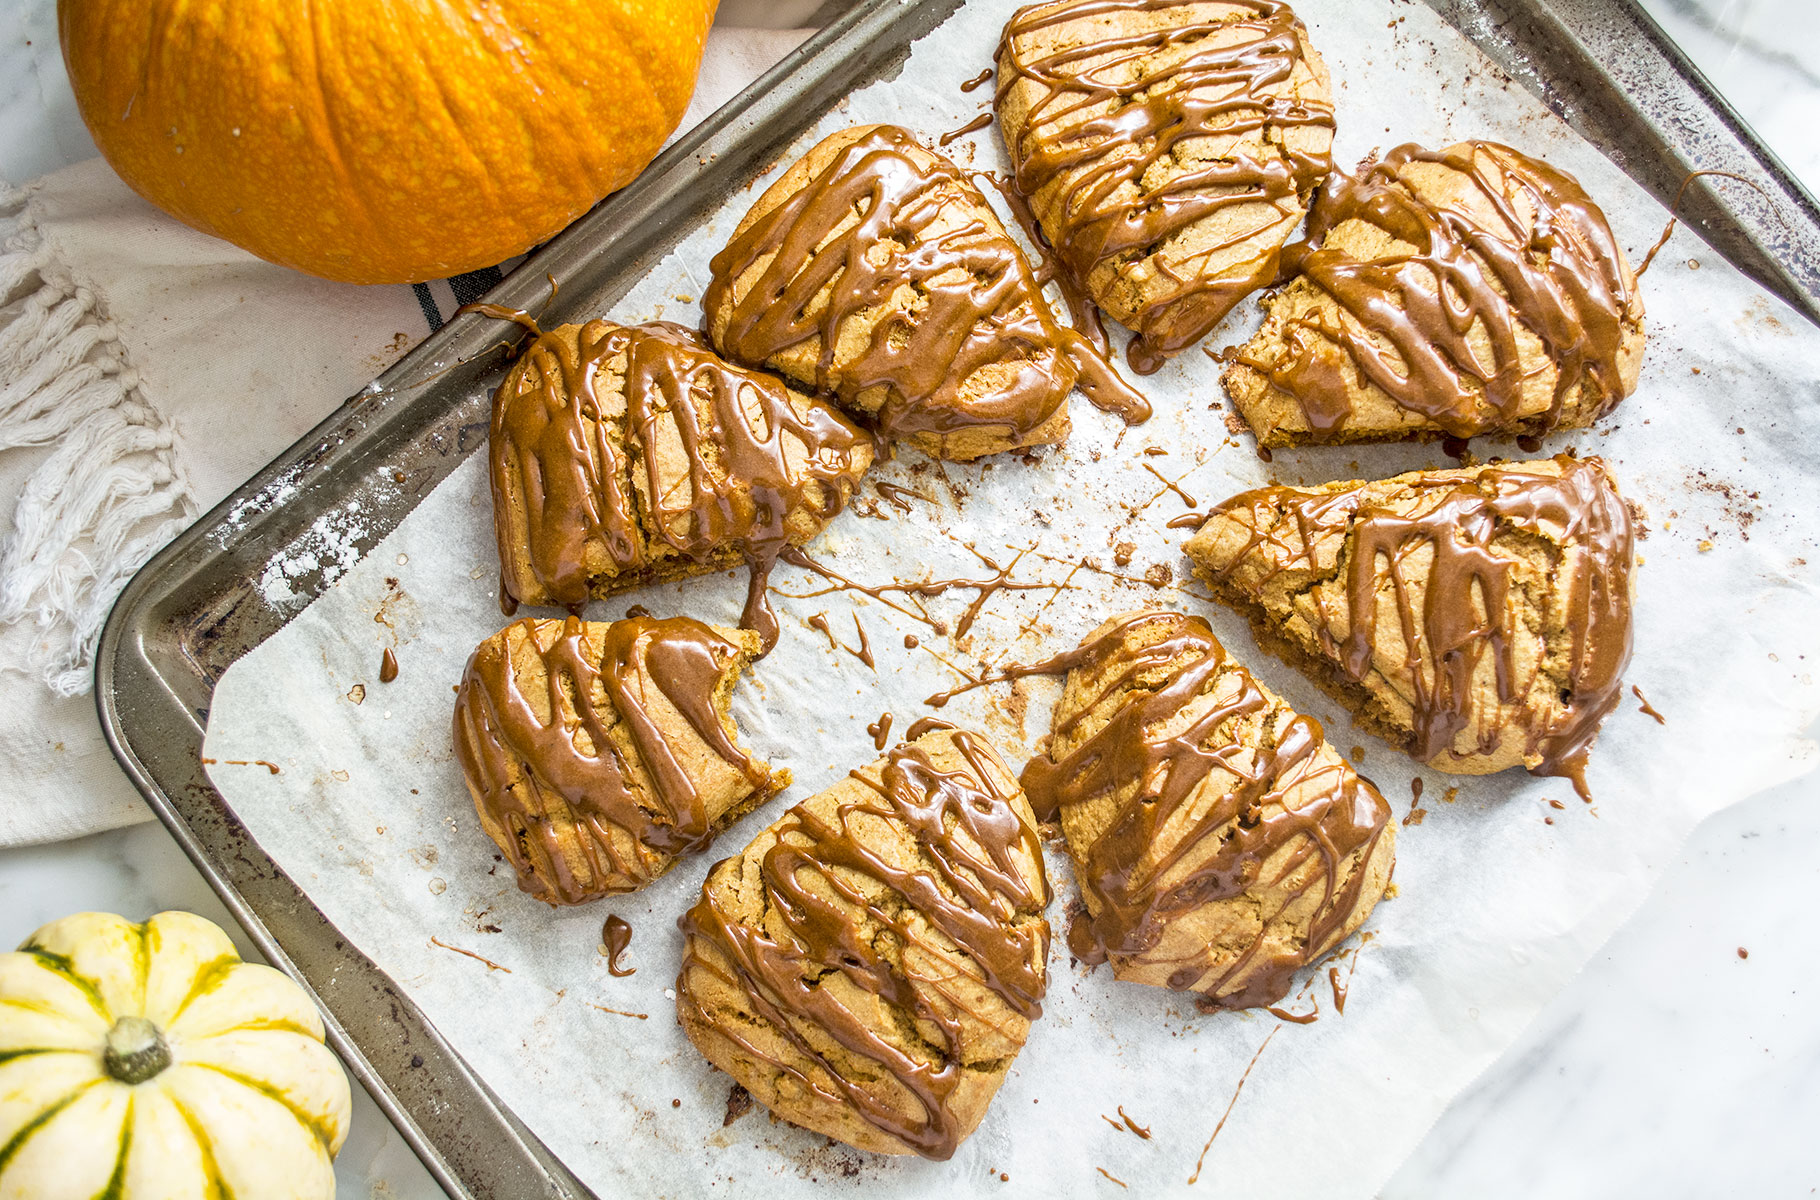 Paleo Pumpkin Scones with Spiced Drizzle | Lemons and Basil